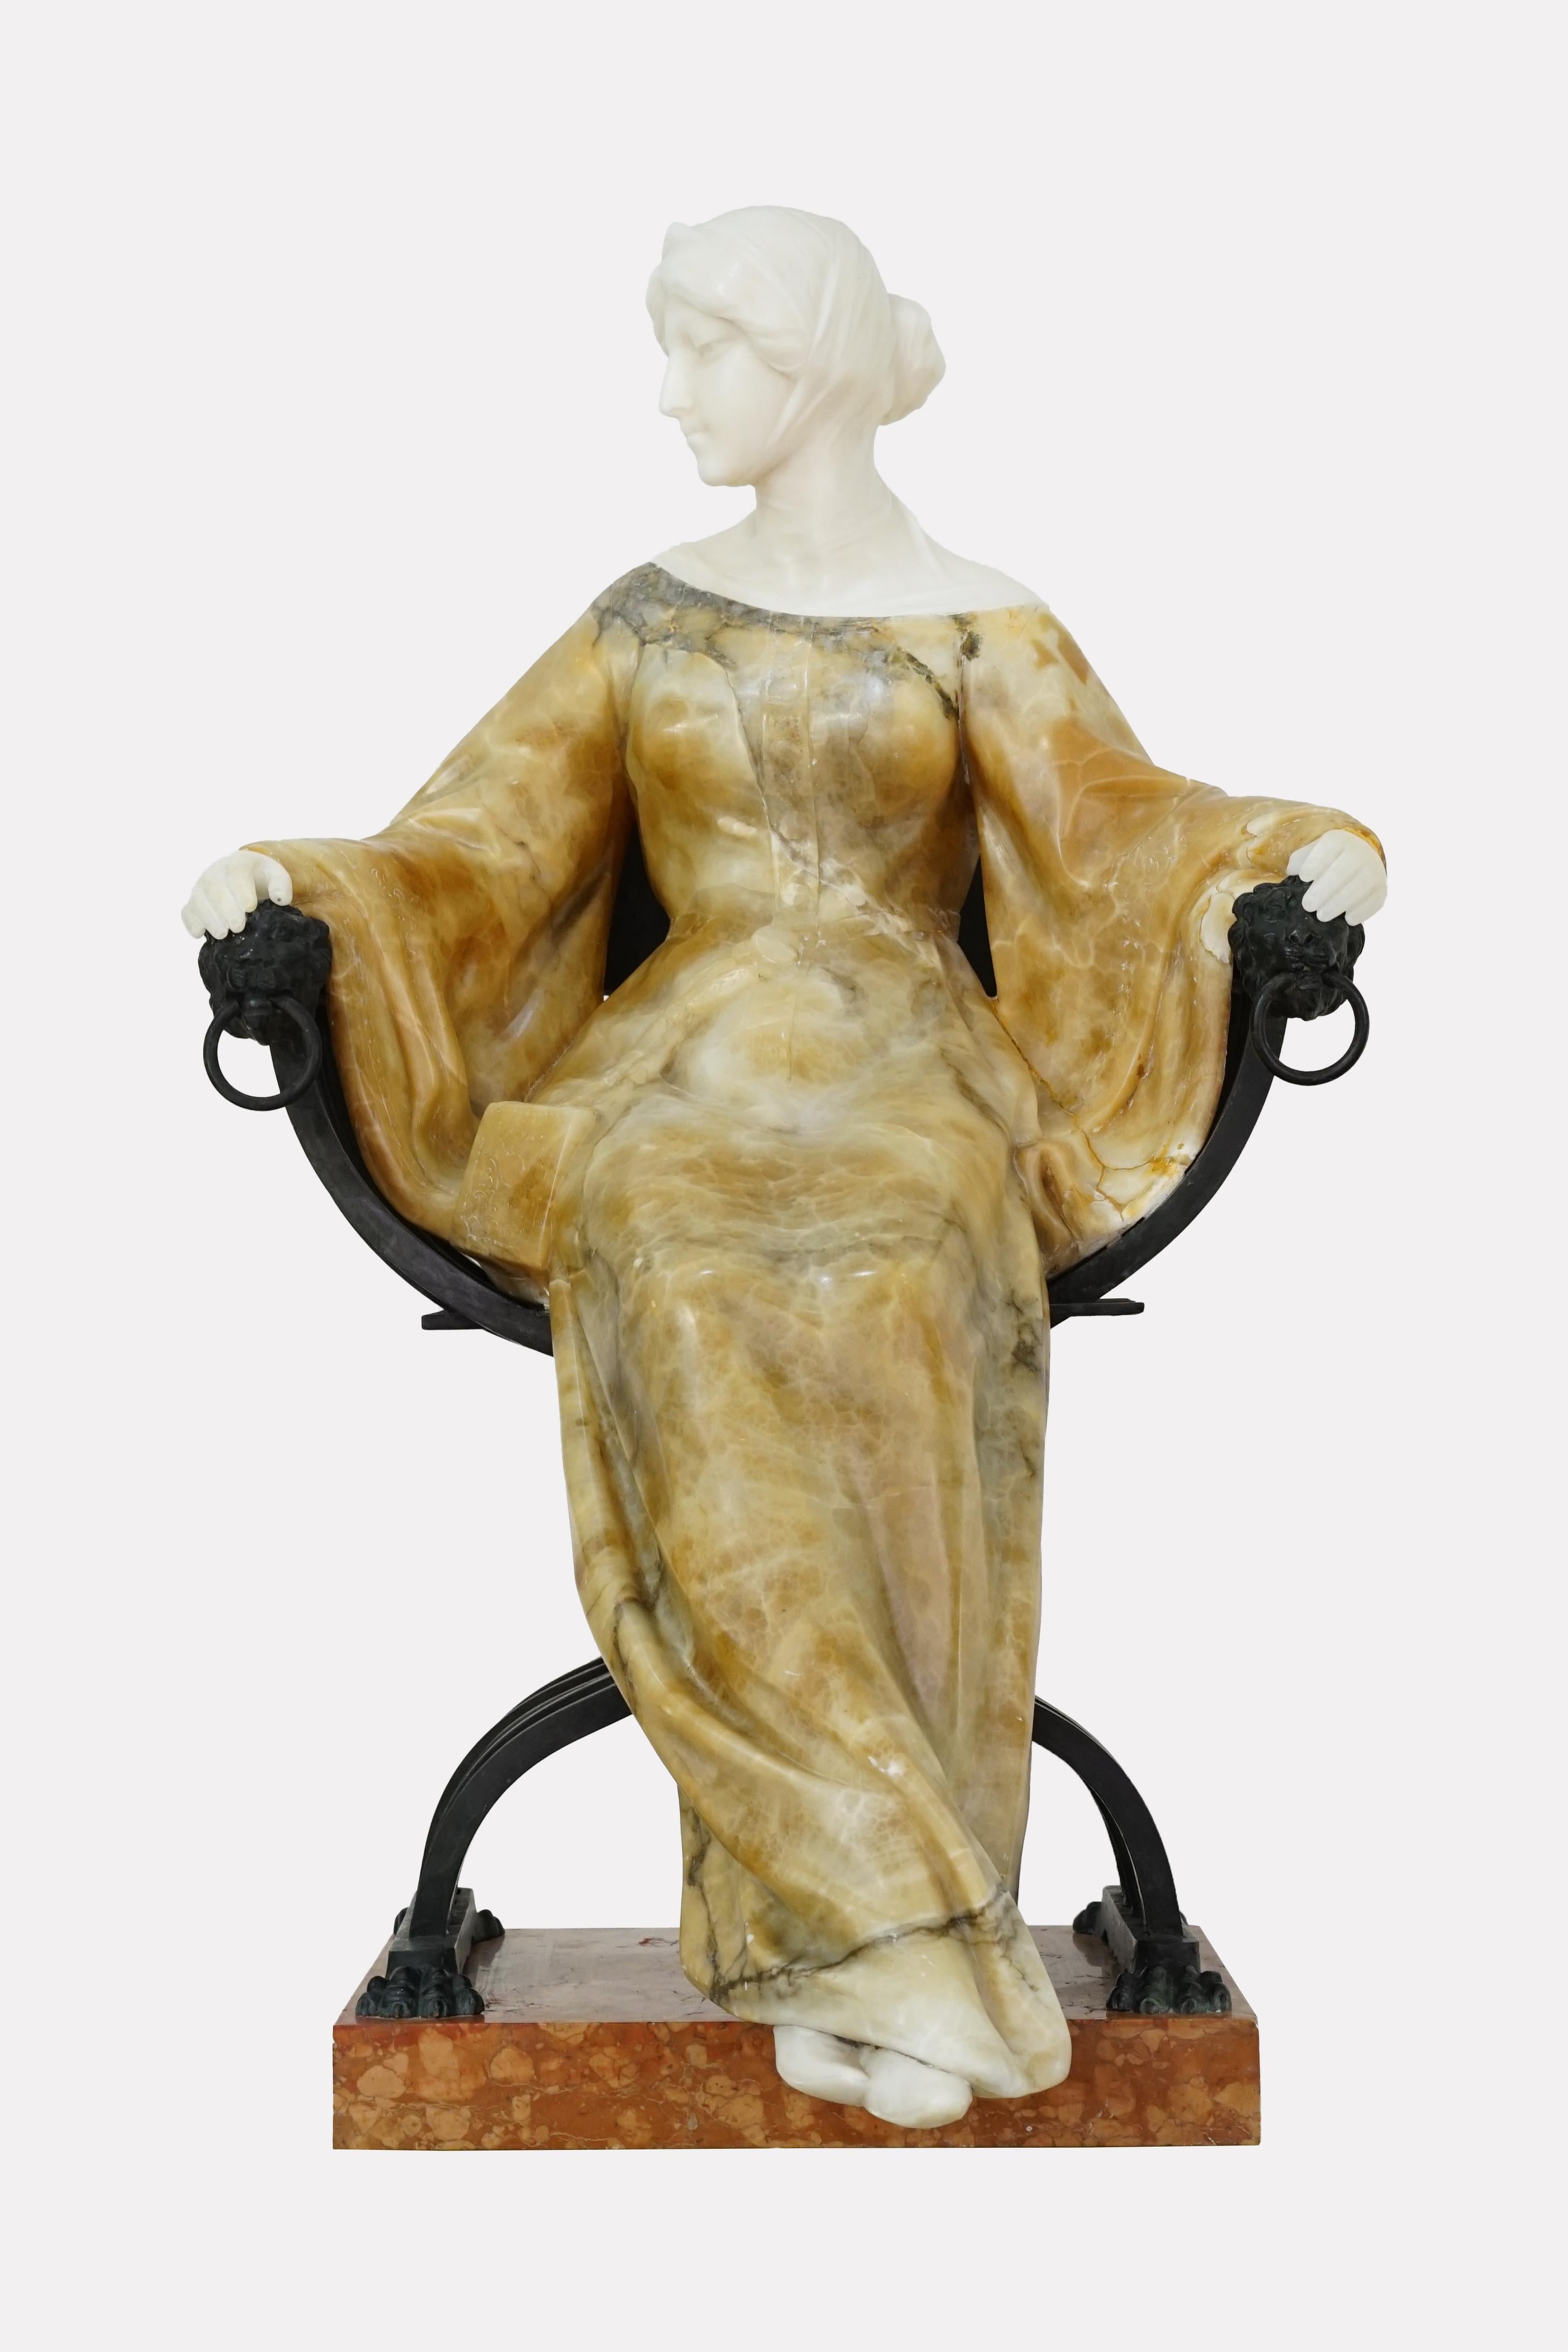 Classic Italian sculpture Antonio Frilli
Origin Italy Circa 1900
Reason: Beatrice
Artist: Antonio Frilli (1860-1920)
Mterialies: Alabaster Woman, Savonarola Style Chair in Bronze, Marble Base
The alabaster is in two colors and the marble is Rosa